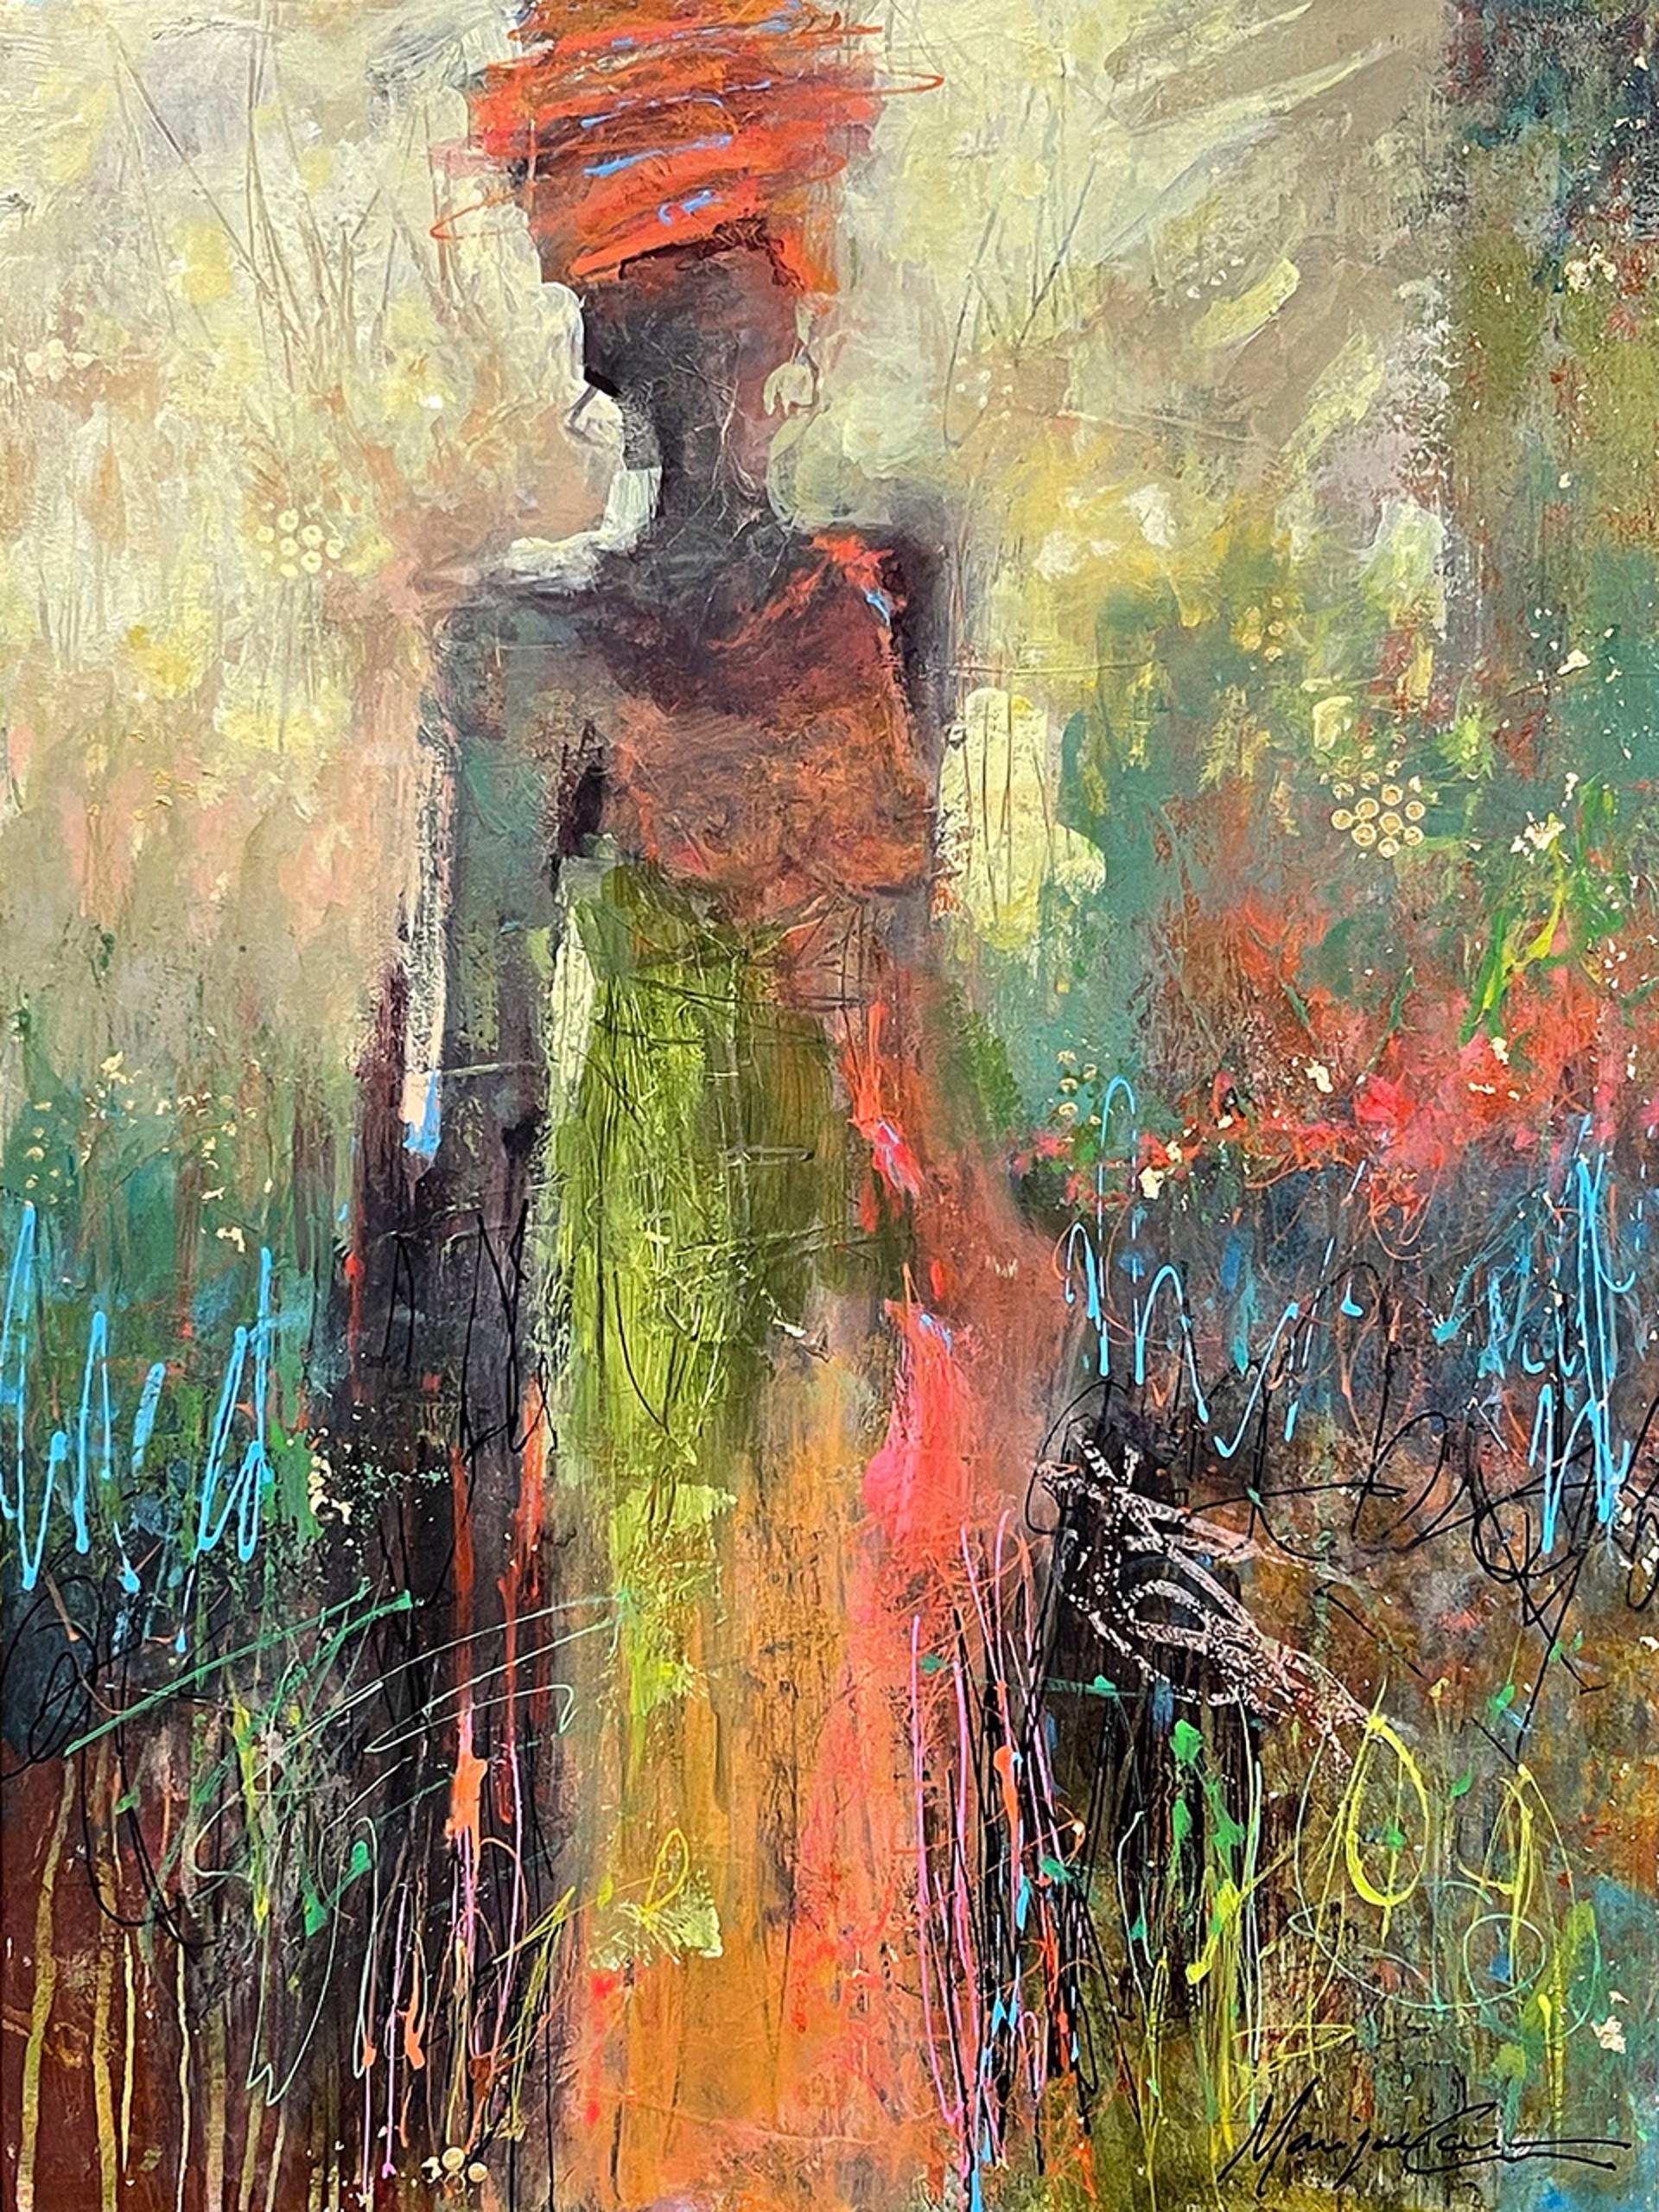 The African Lady by Monique Carr